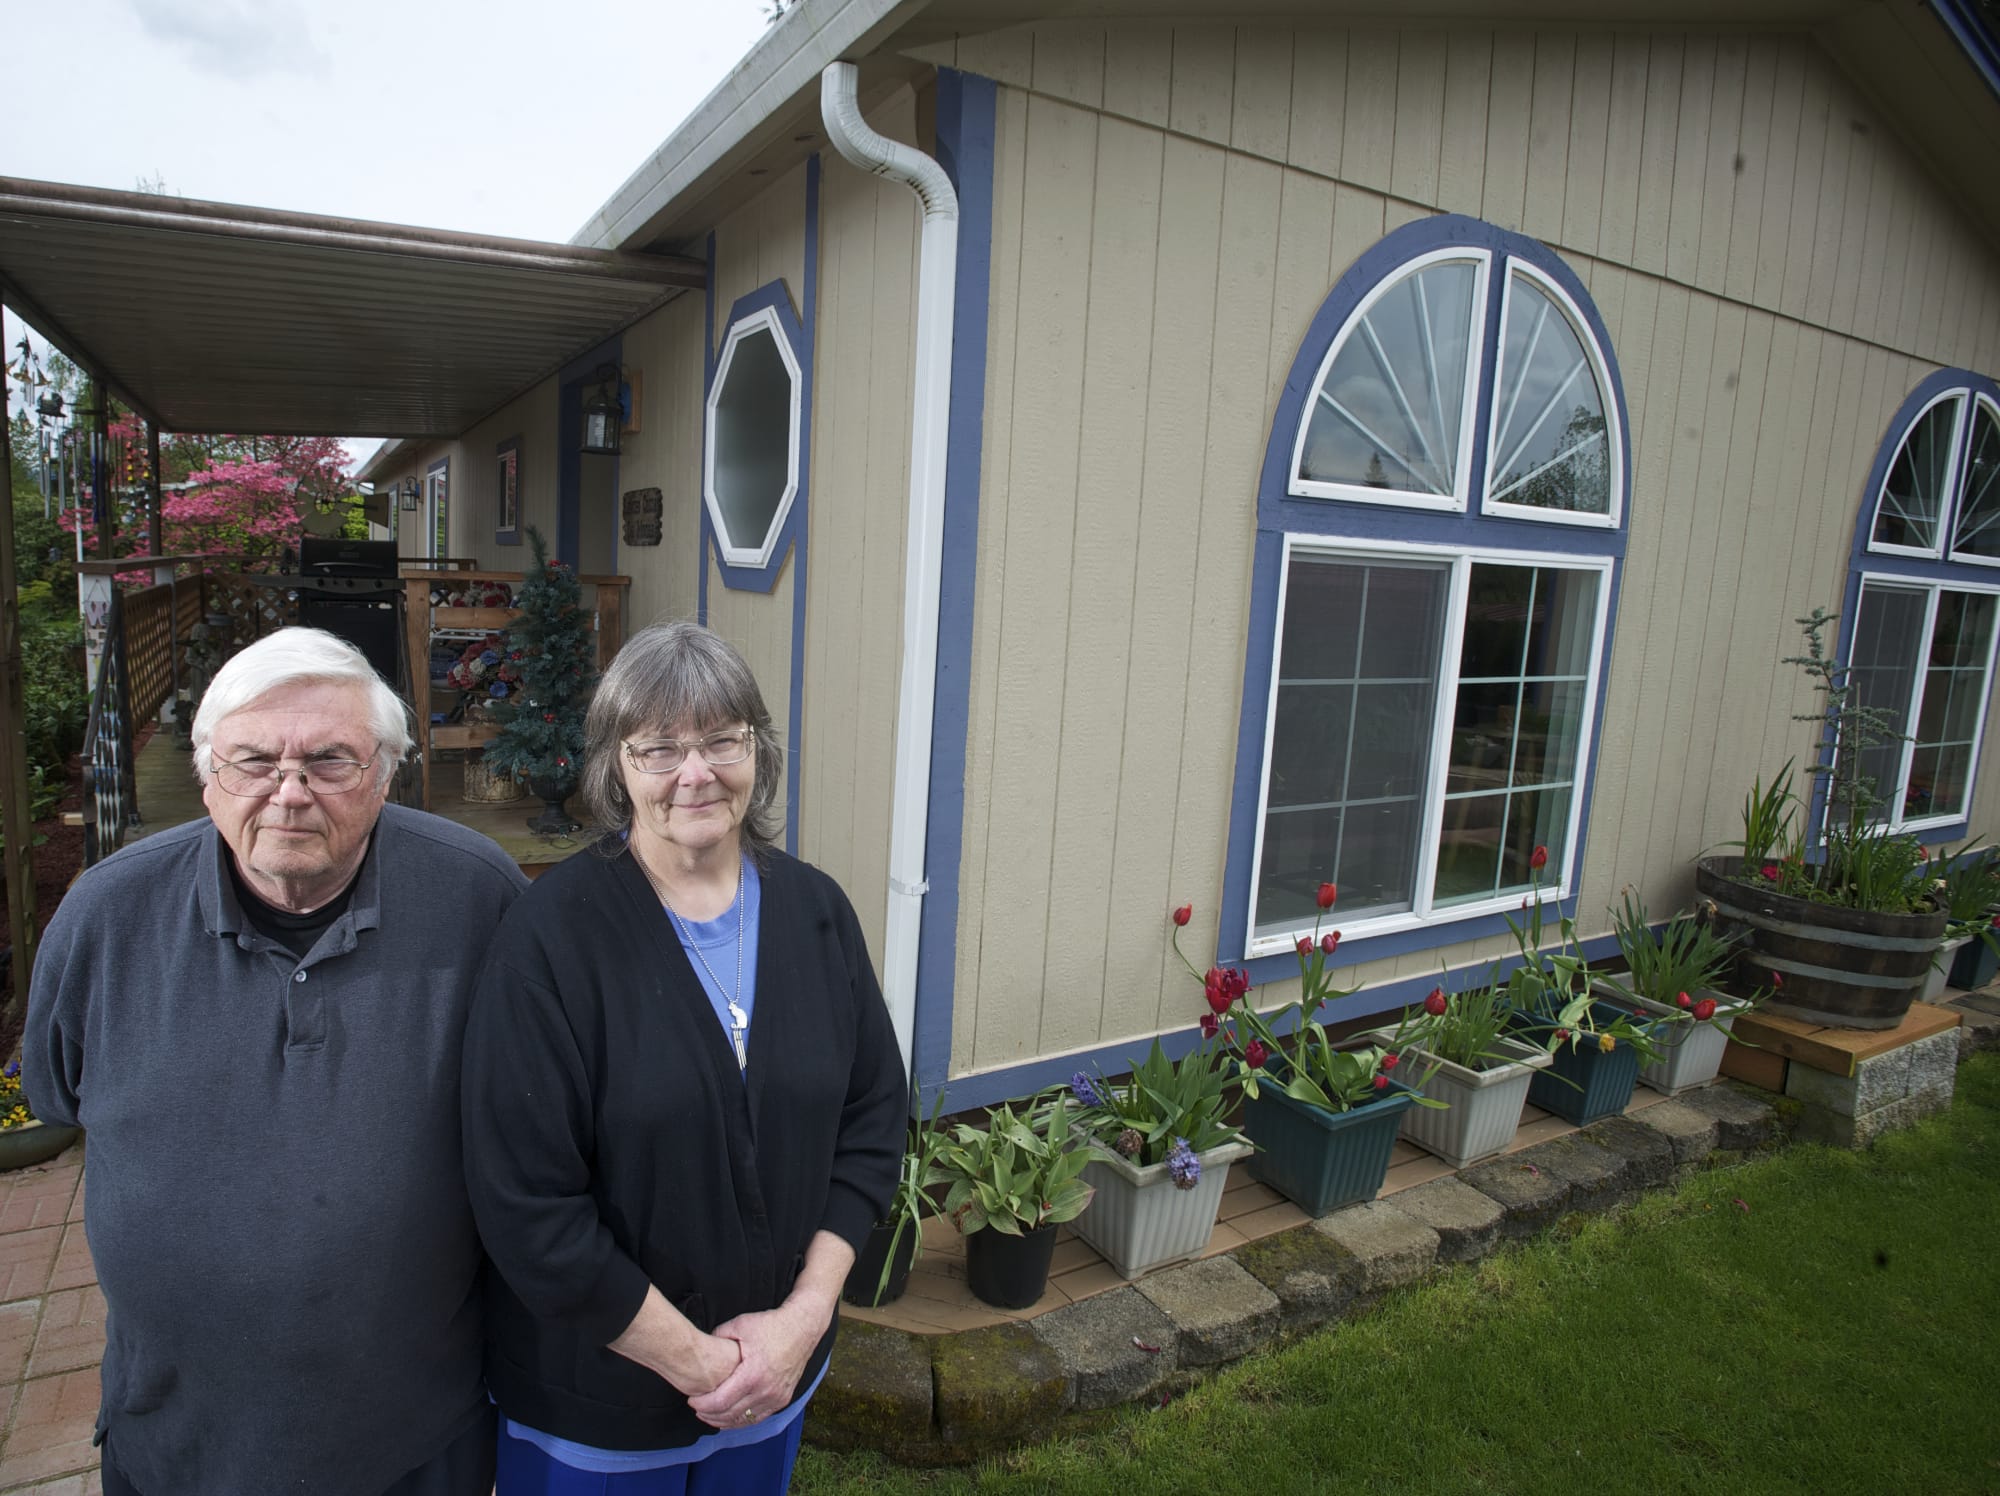 Earl and Clydene Gere, who recently lost an appeal of their property value to the Board of Equalization, stand in front of their partially rebuilt Brush Prairie mobile home.